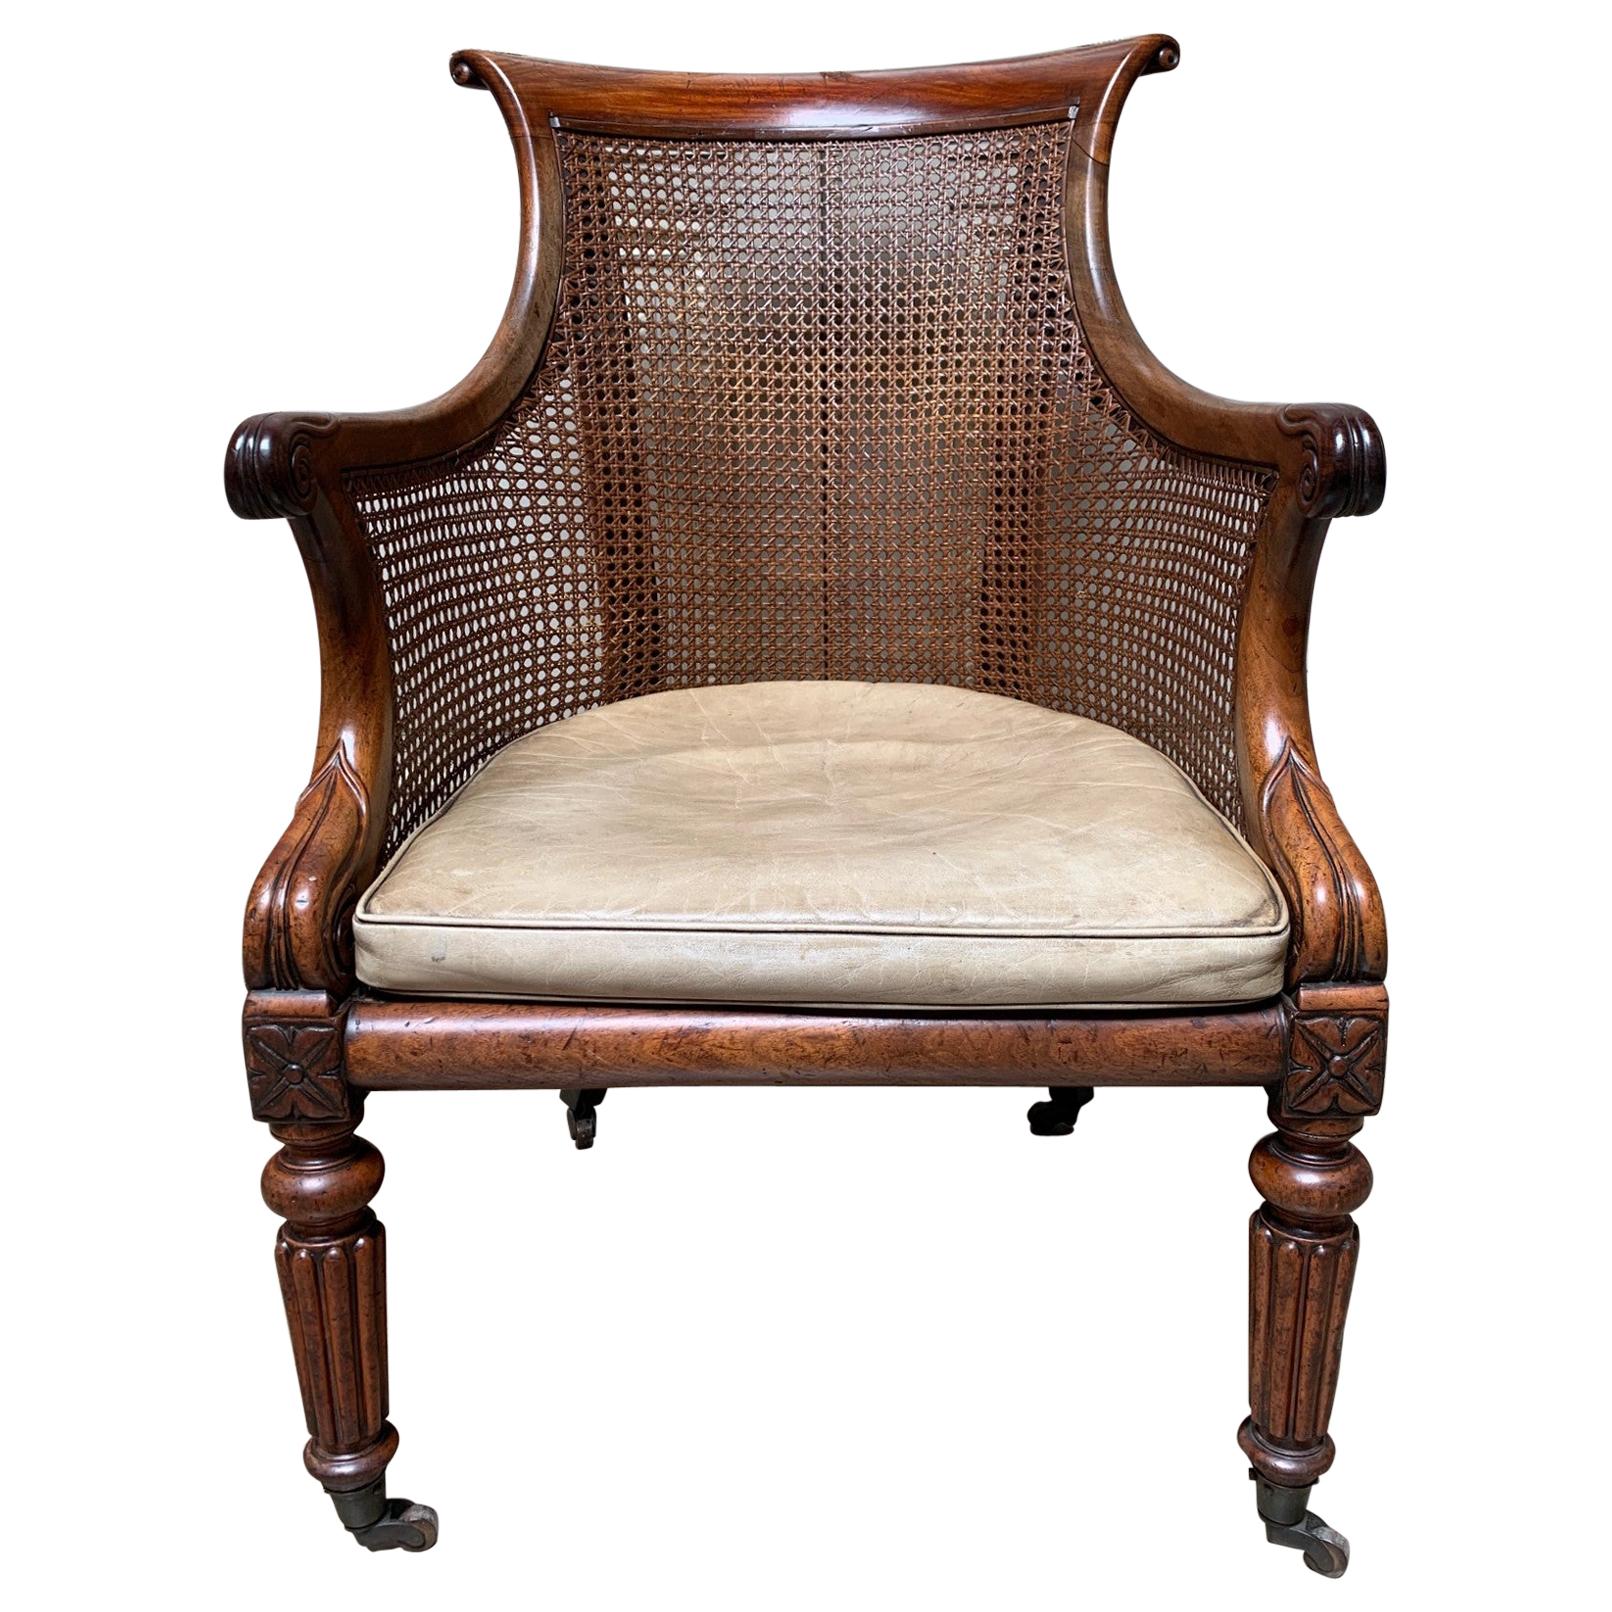 19th Century English William IV Walnut Library Chair with Cane